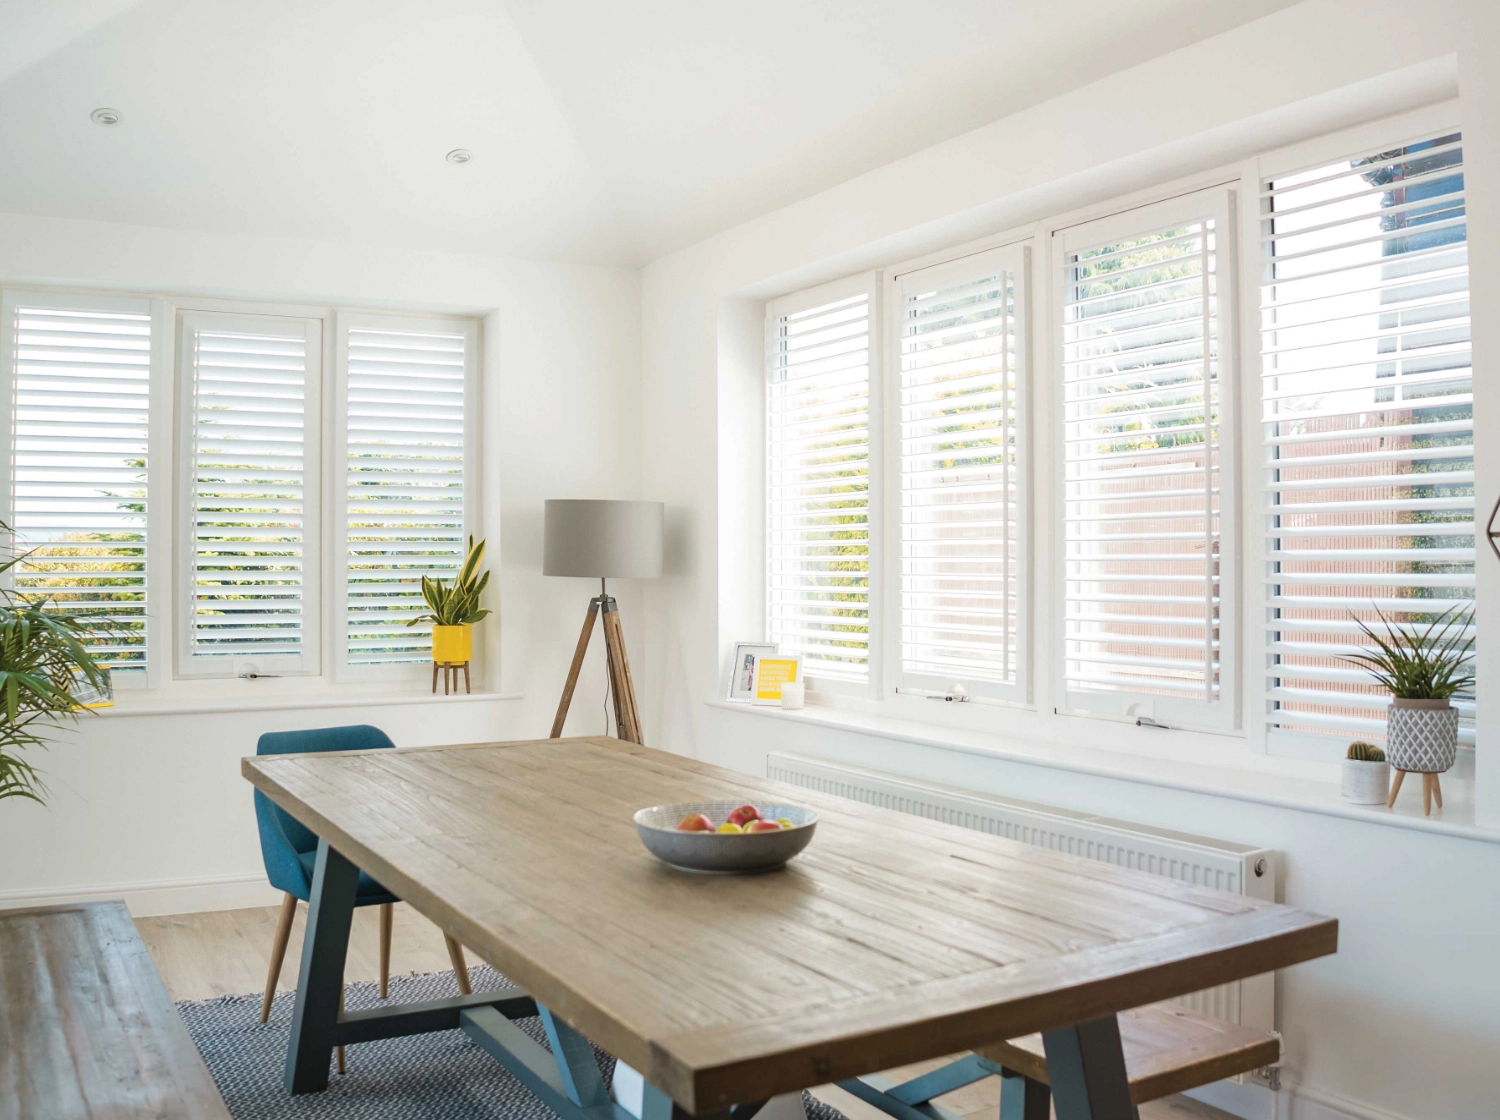 New Product - Perfect Fit Shutters